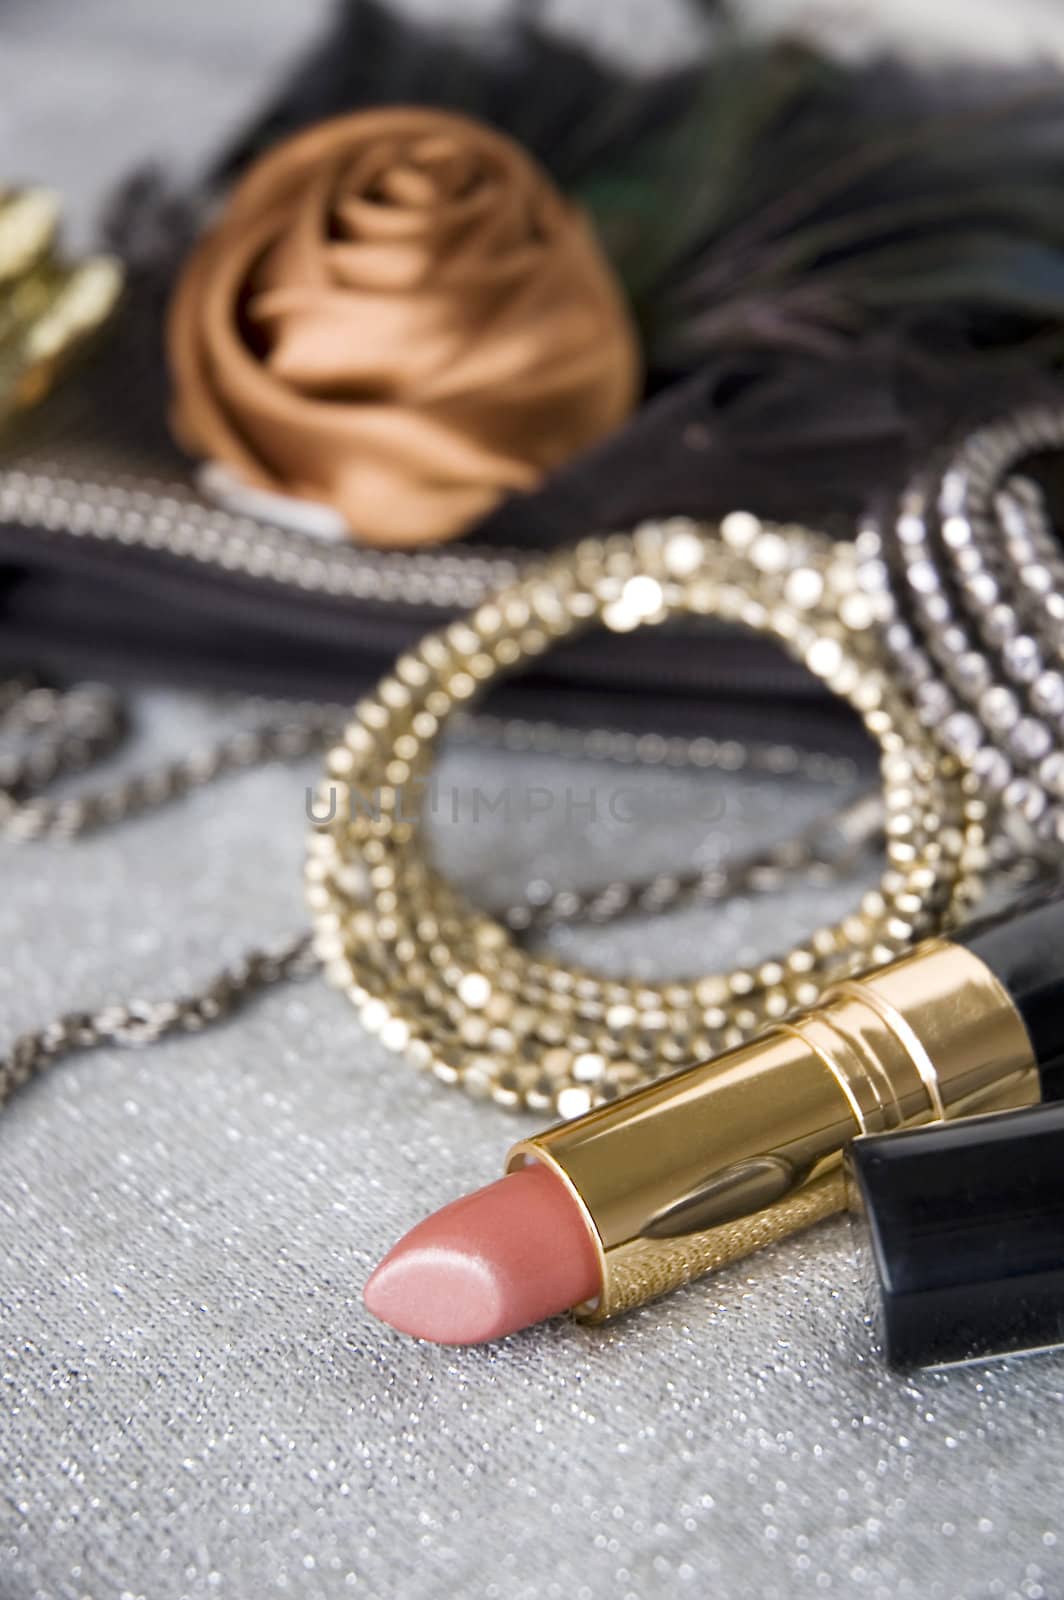 lipstick and accessories by daniaphoto